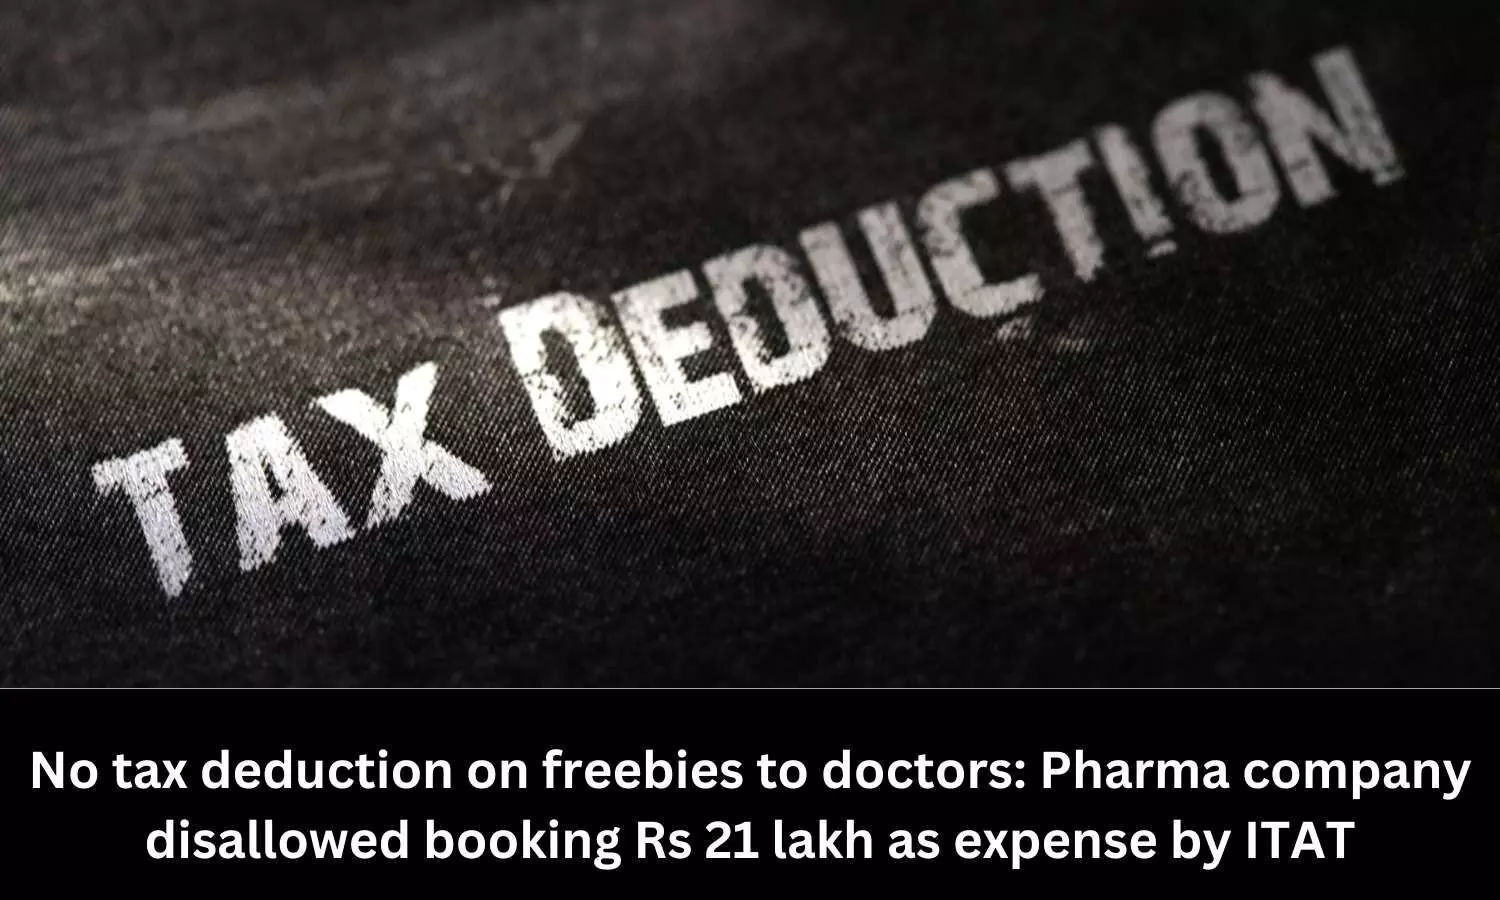 No tax deduction on freebies to doctors: Pharma firm disallowed booking Rs 21 lakh as expense by ITAT